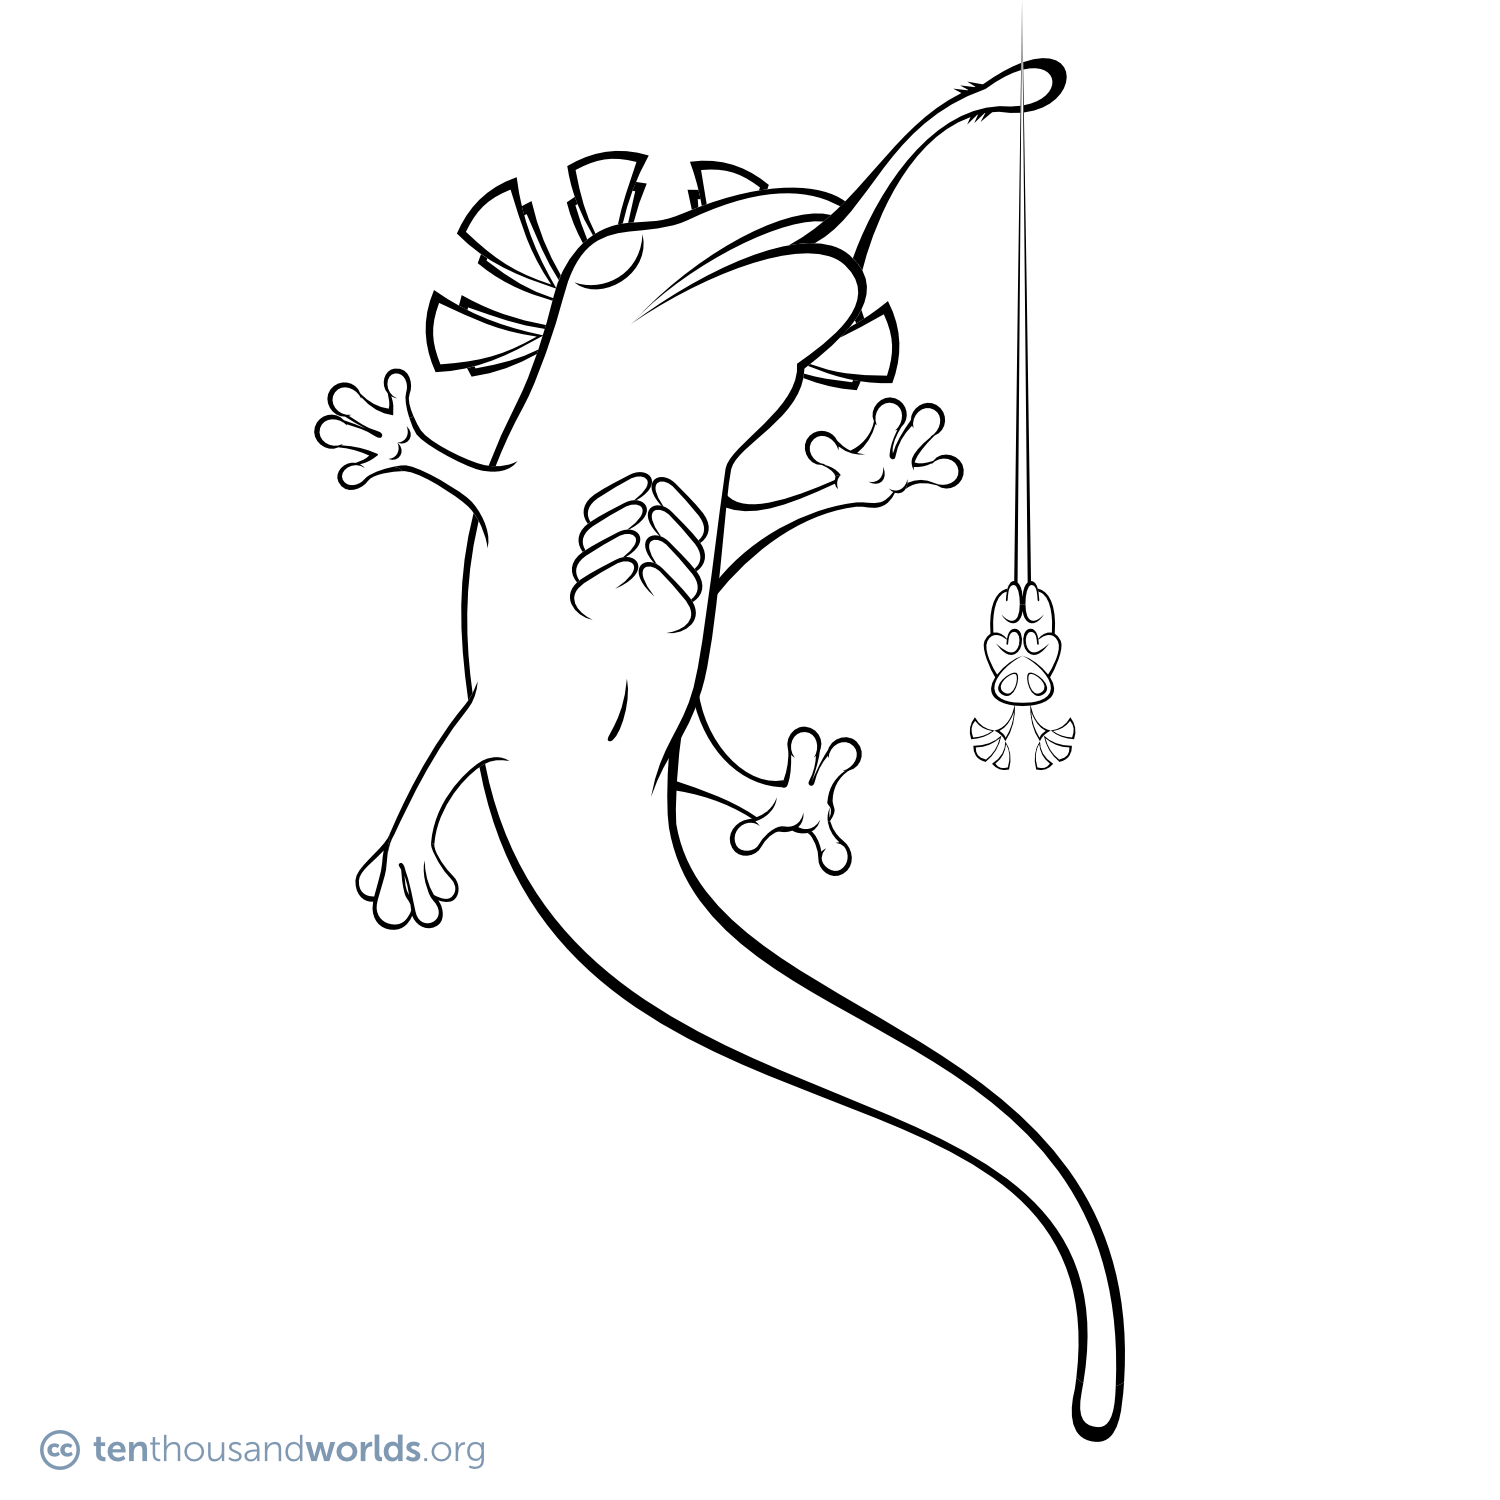 An ink outline of a flying salamander-like creature shoots out a long, barbed frog-like tongue. It has prominent rib-like structures and is wreathed in a headdress of floating triangles. A tiny, grub-like creature, with antennae made of triangles, floats upside-down by a tread.